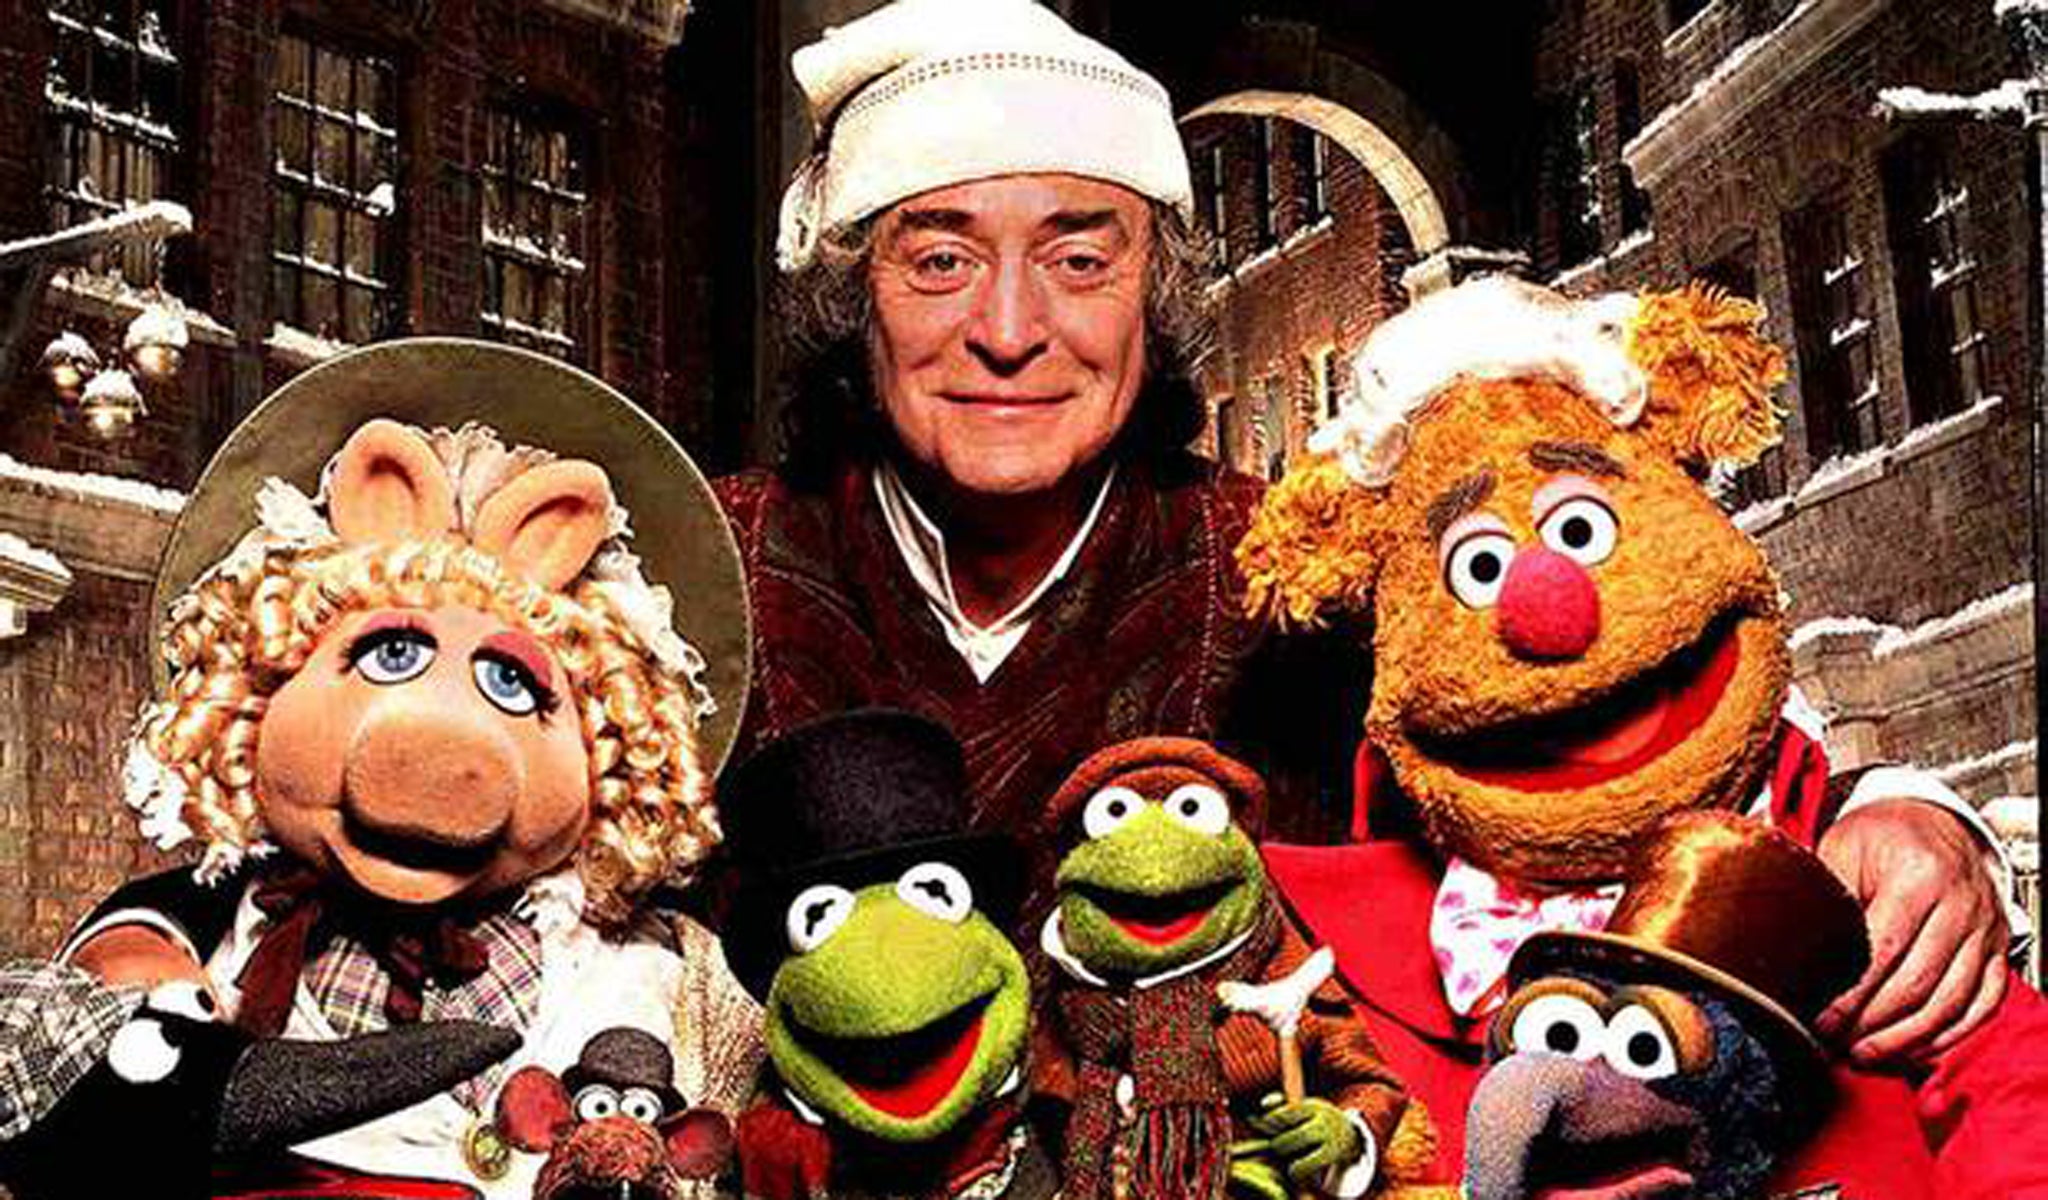 Michael Caine stars in the Muppet’s take on Dickens’ tale, 'A Christmas Carol'. Keeping the morals of the original story the Muppet’s add a touch of light-hearted frivolity to an enjoyable family film.